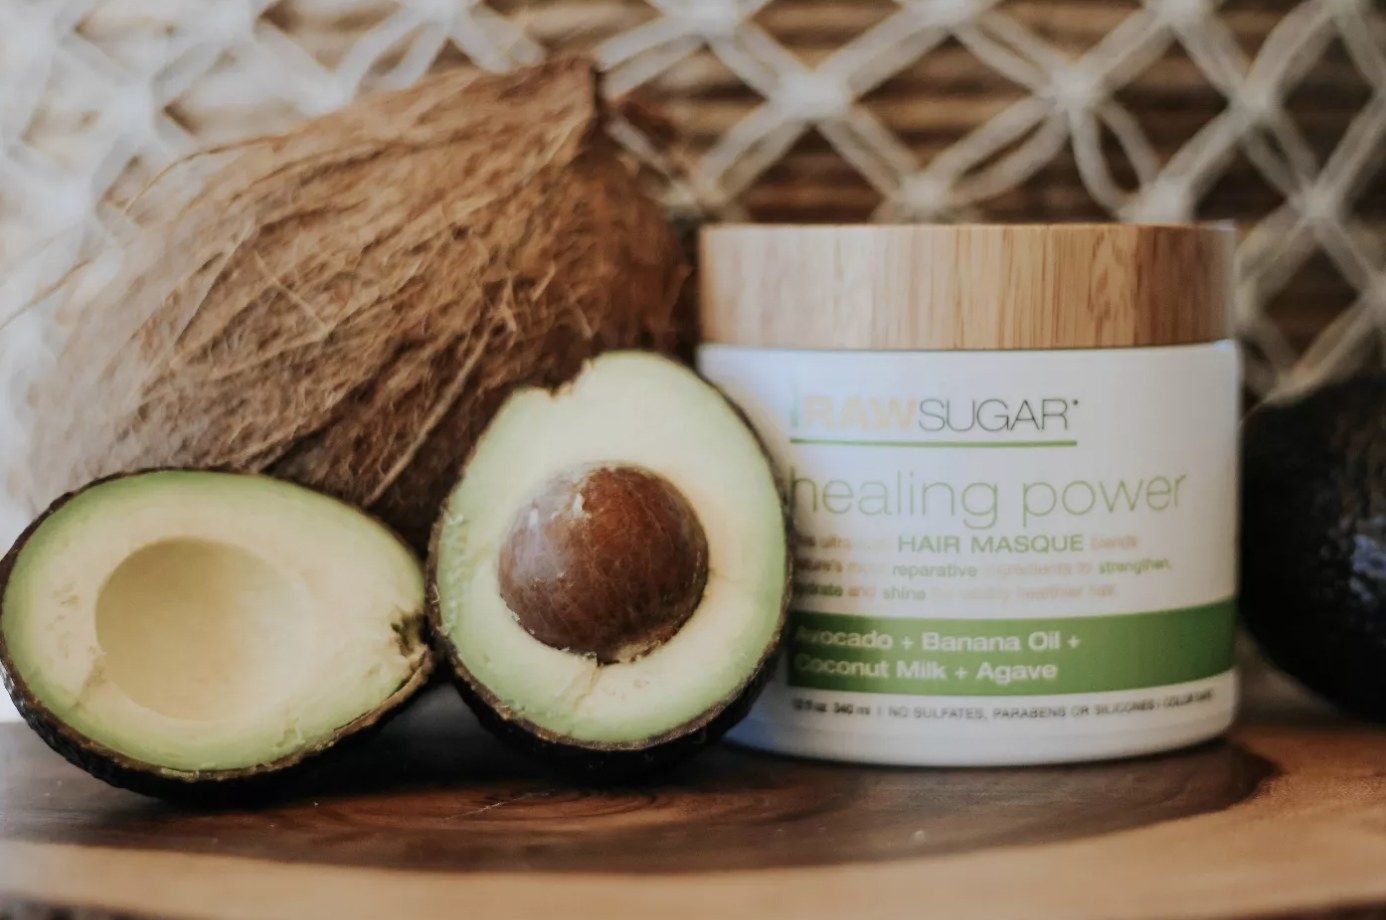 A jar of hair mask with a cut avocado and a whole coconut